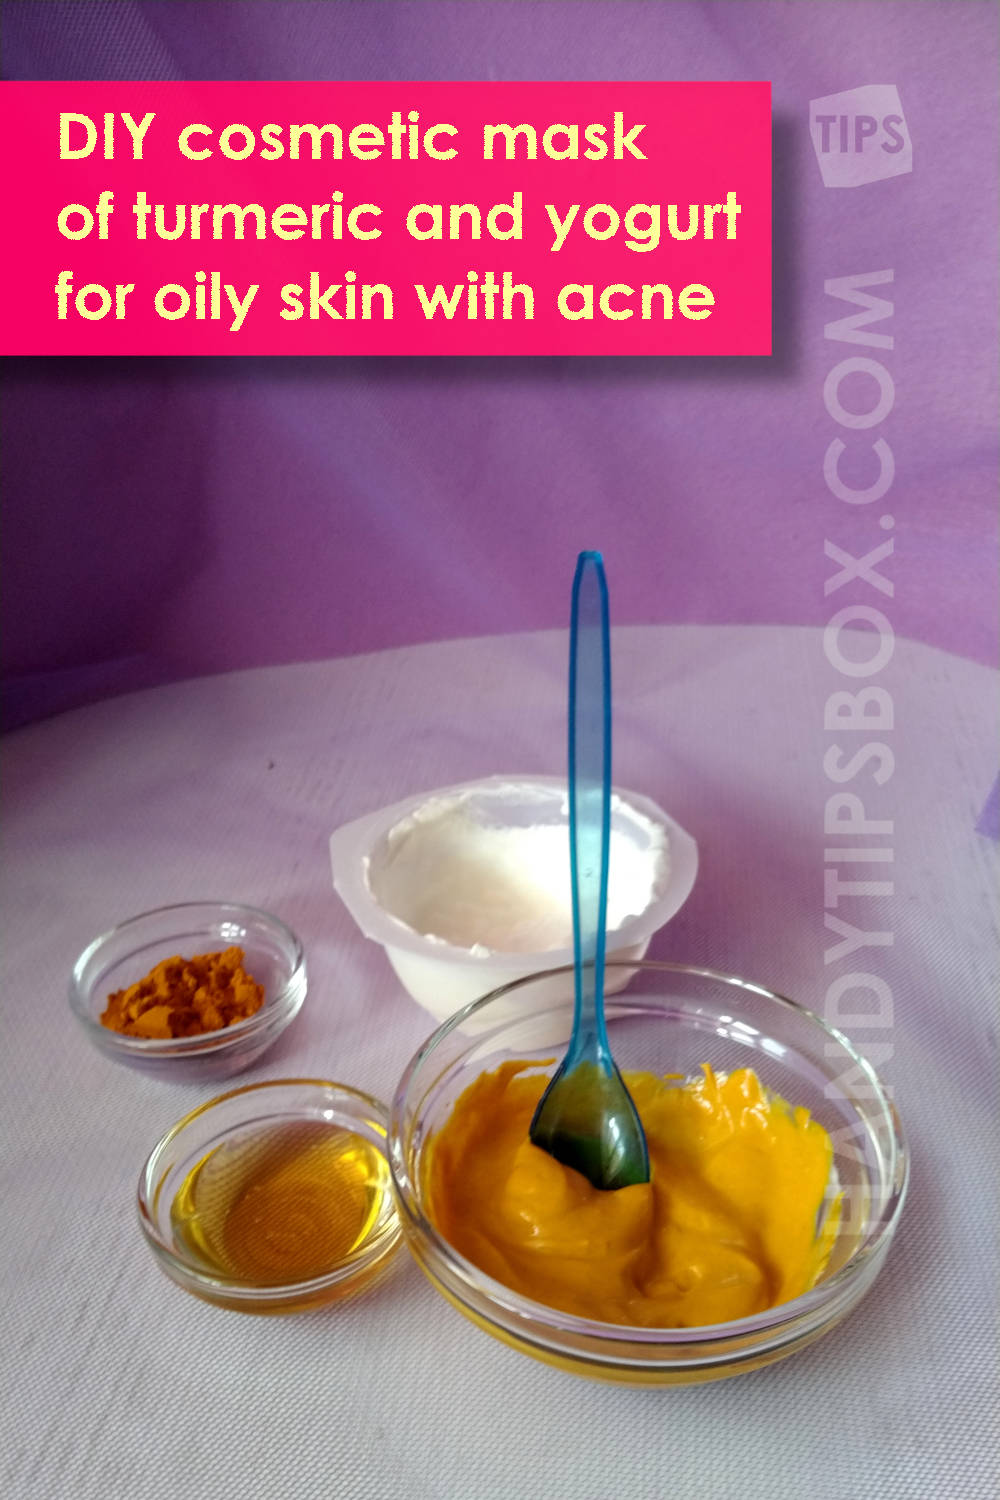 Cosmetic mask of turmeric and yogurt. Ingredients and ready-to-use mask. Vertical image.